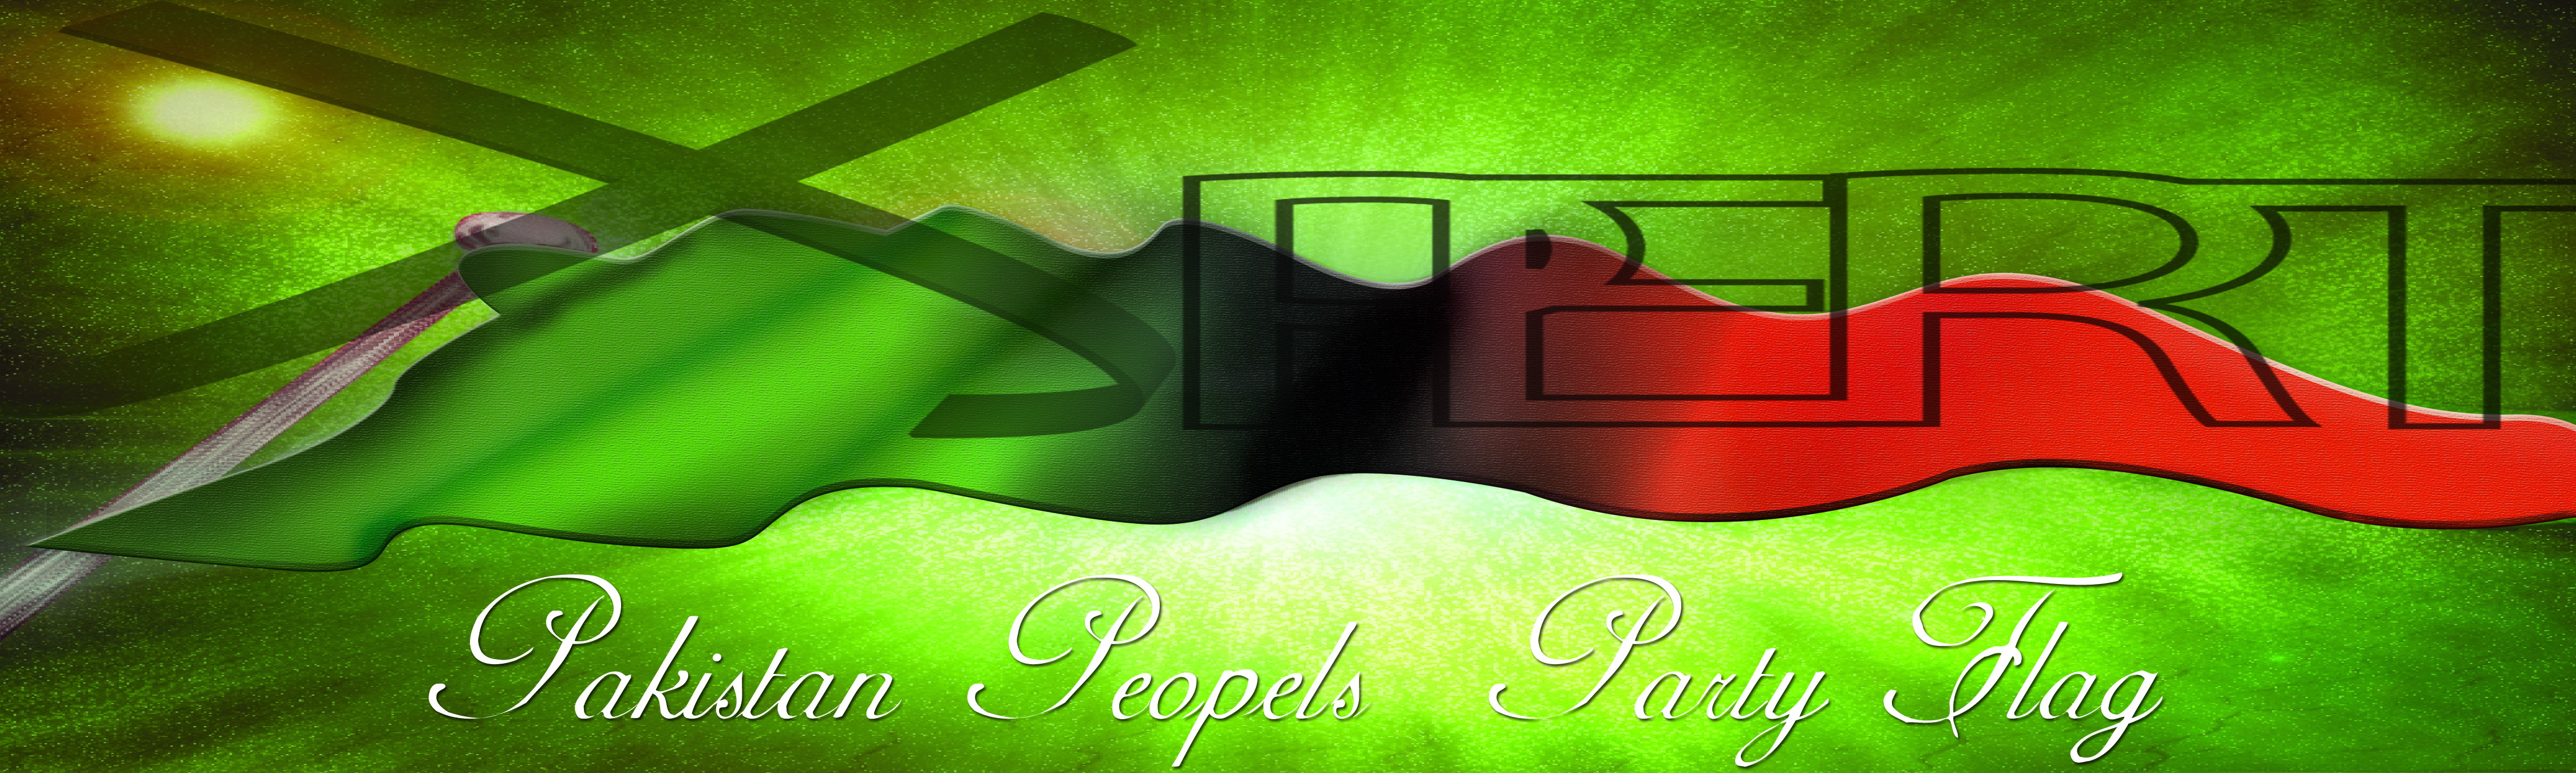 Ppp Flag Wallpapers